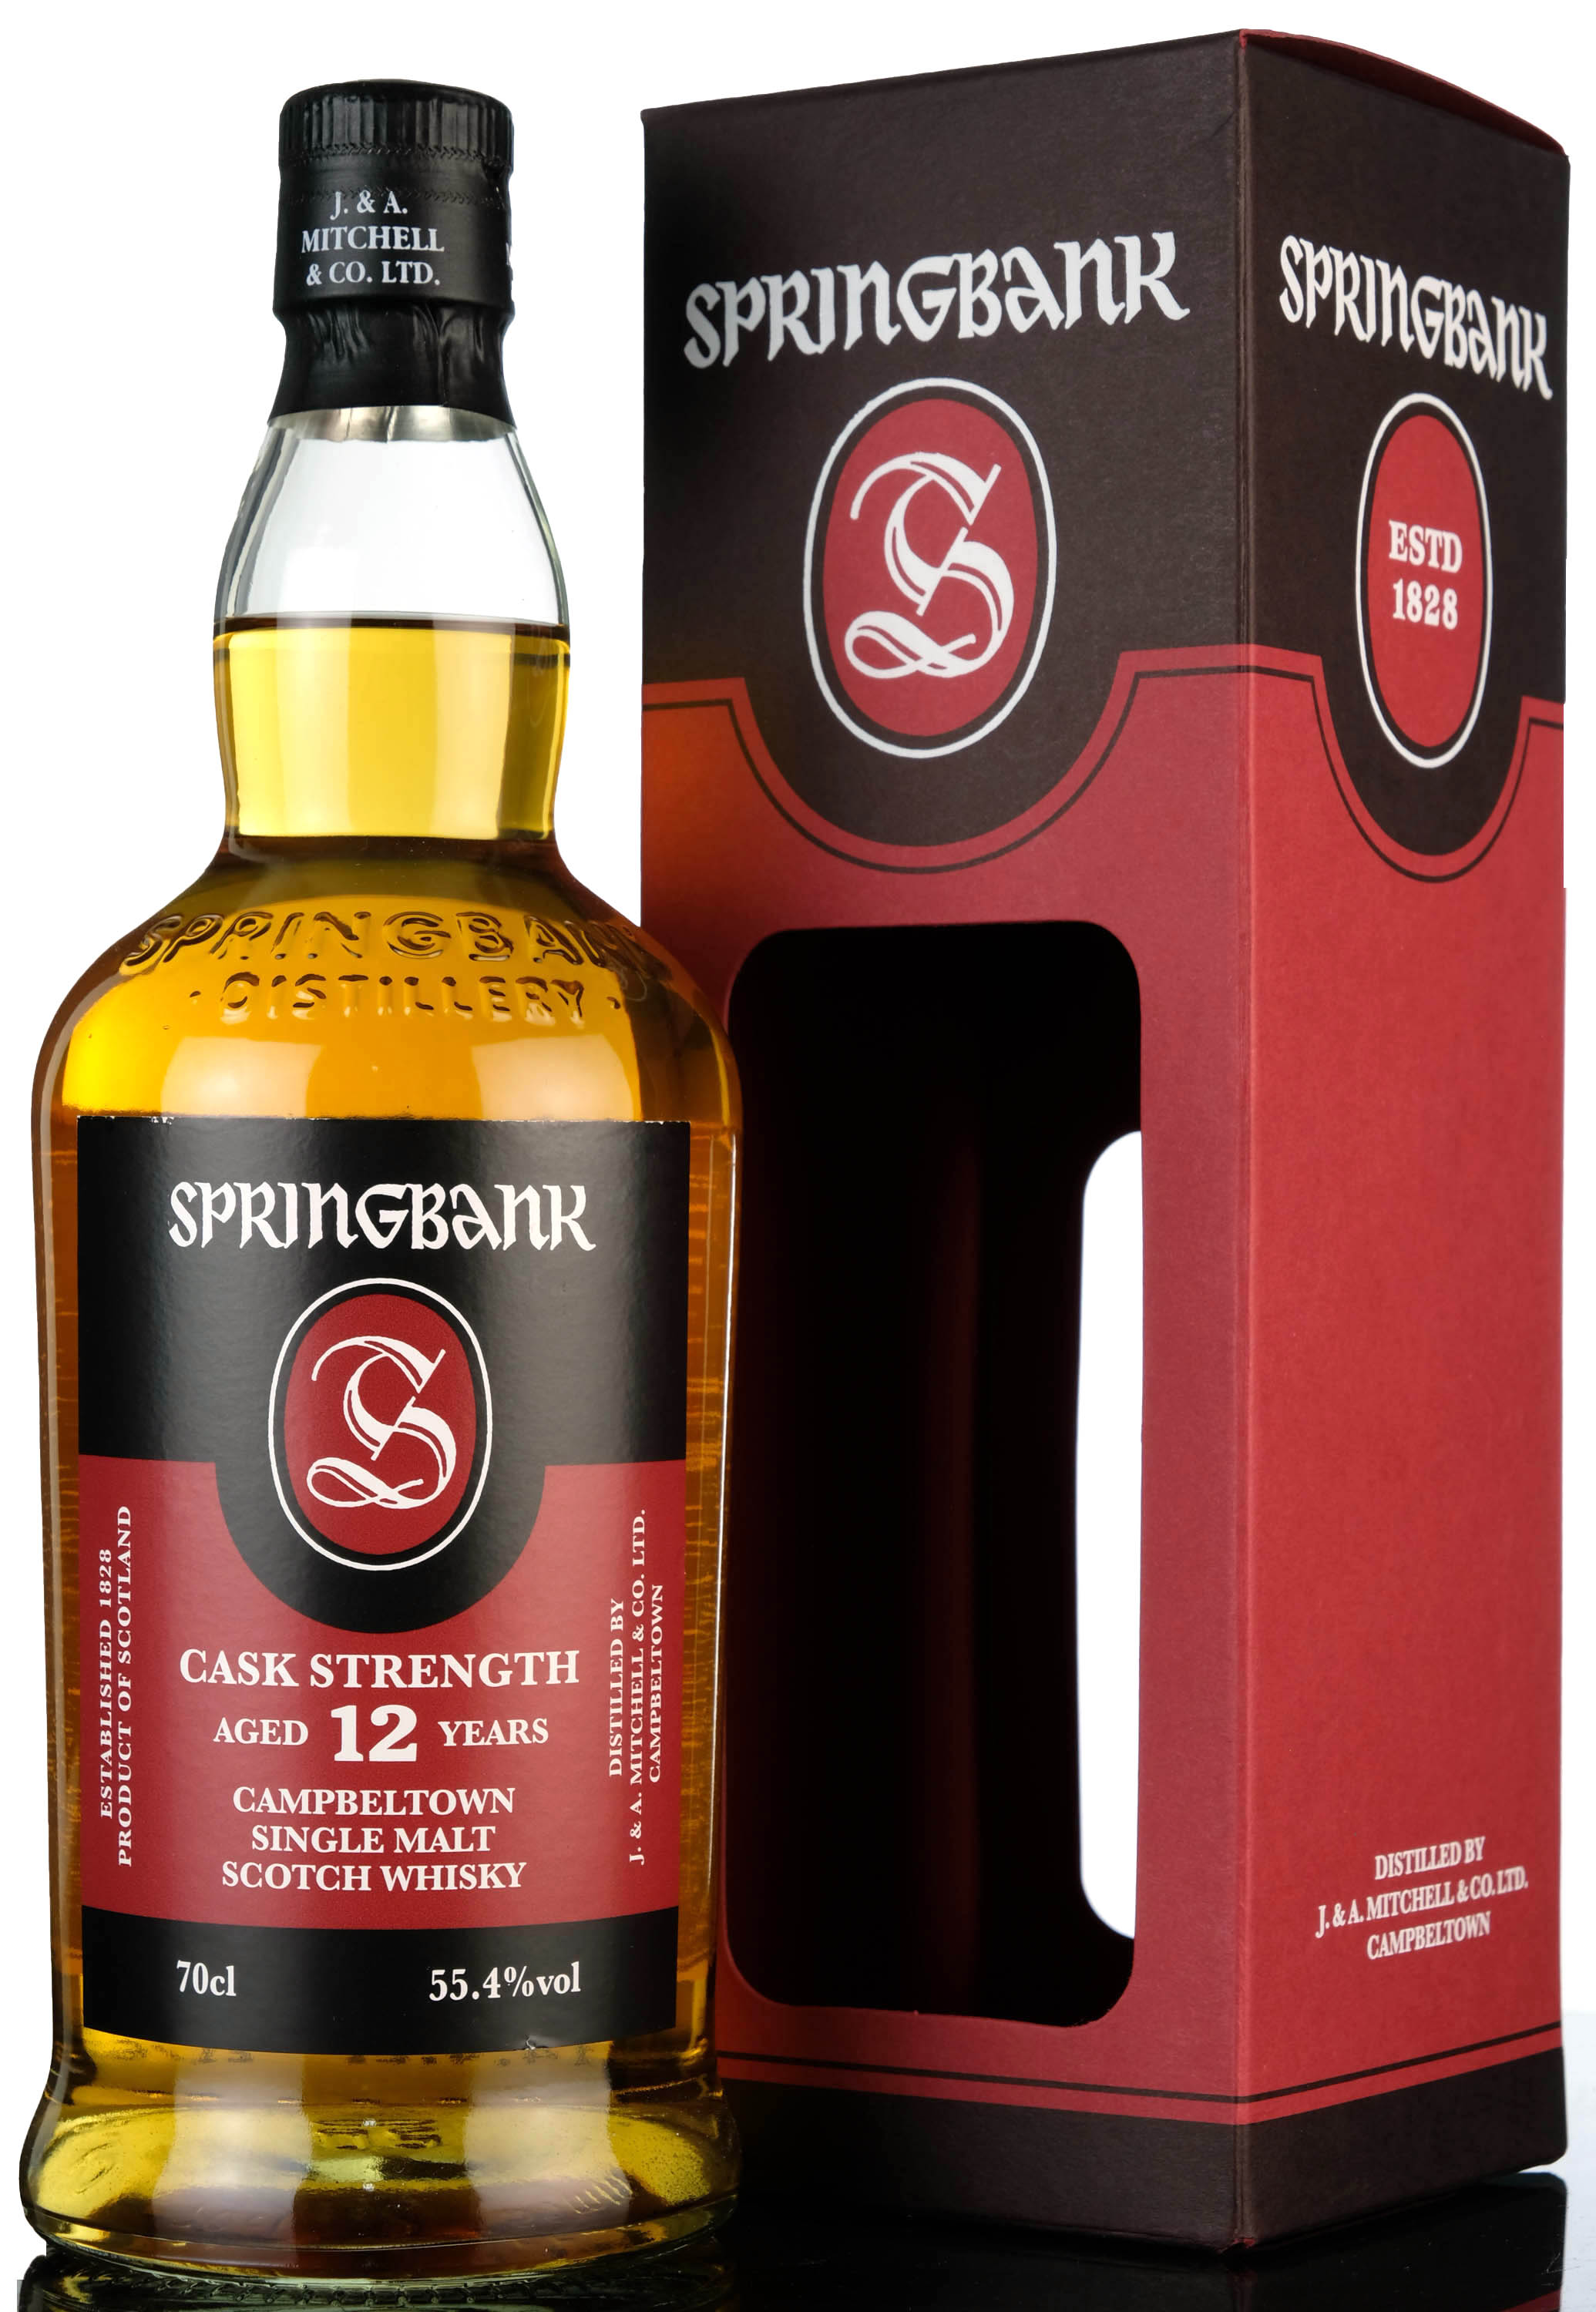 Springbank 12 Year Old - Cask Strength 55.4% - 2021 Release